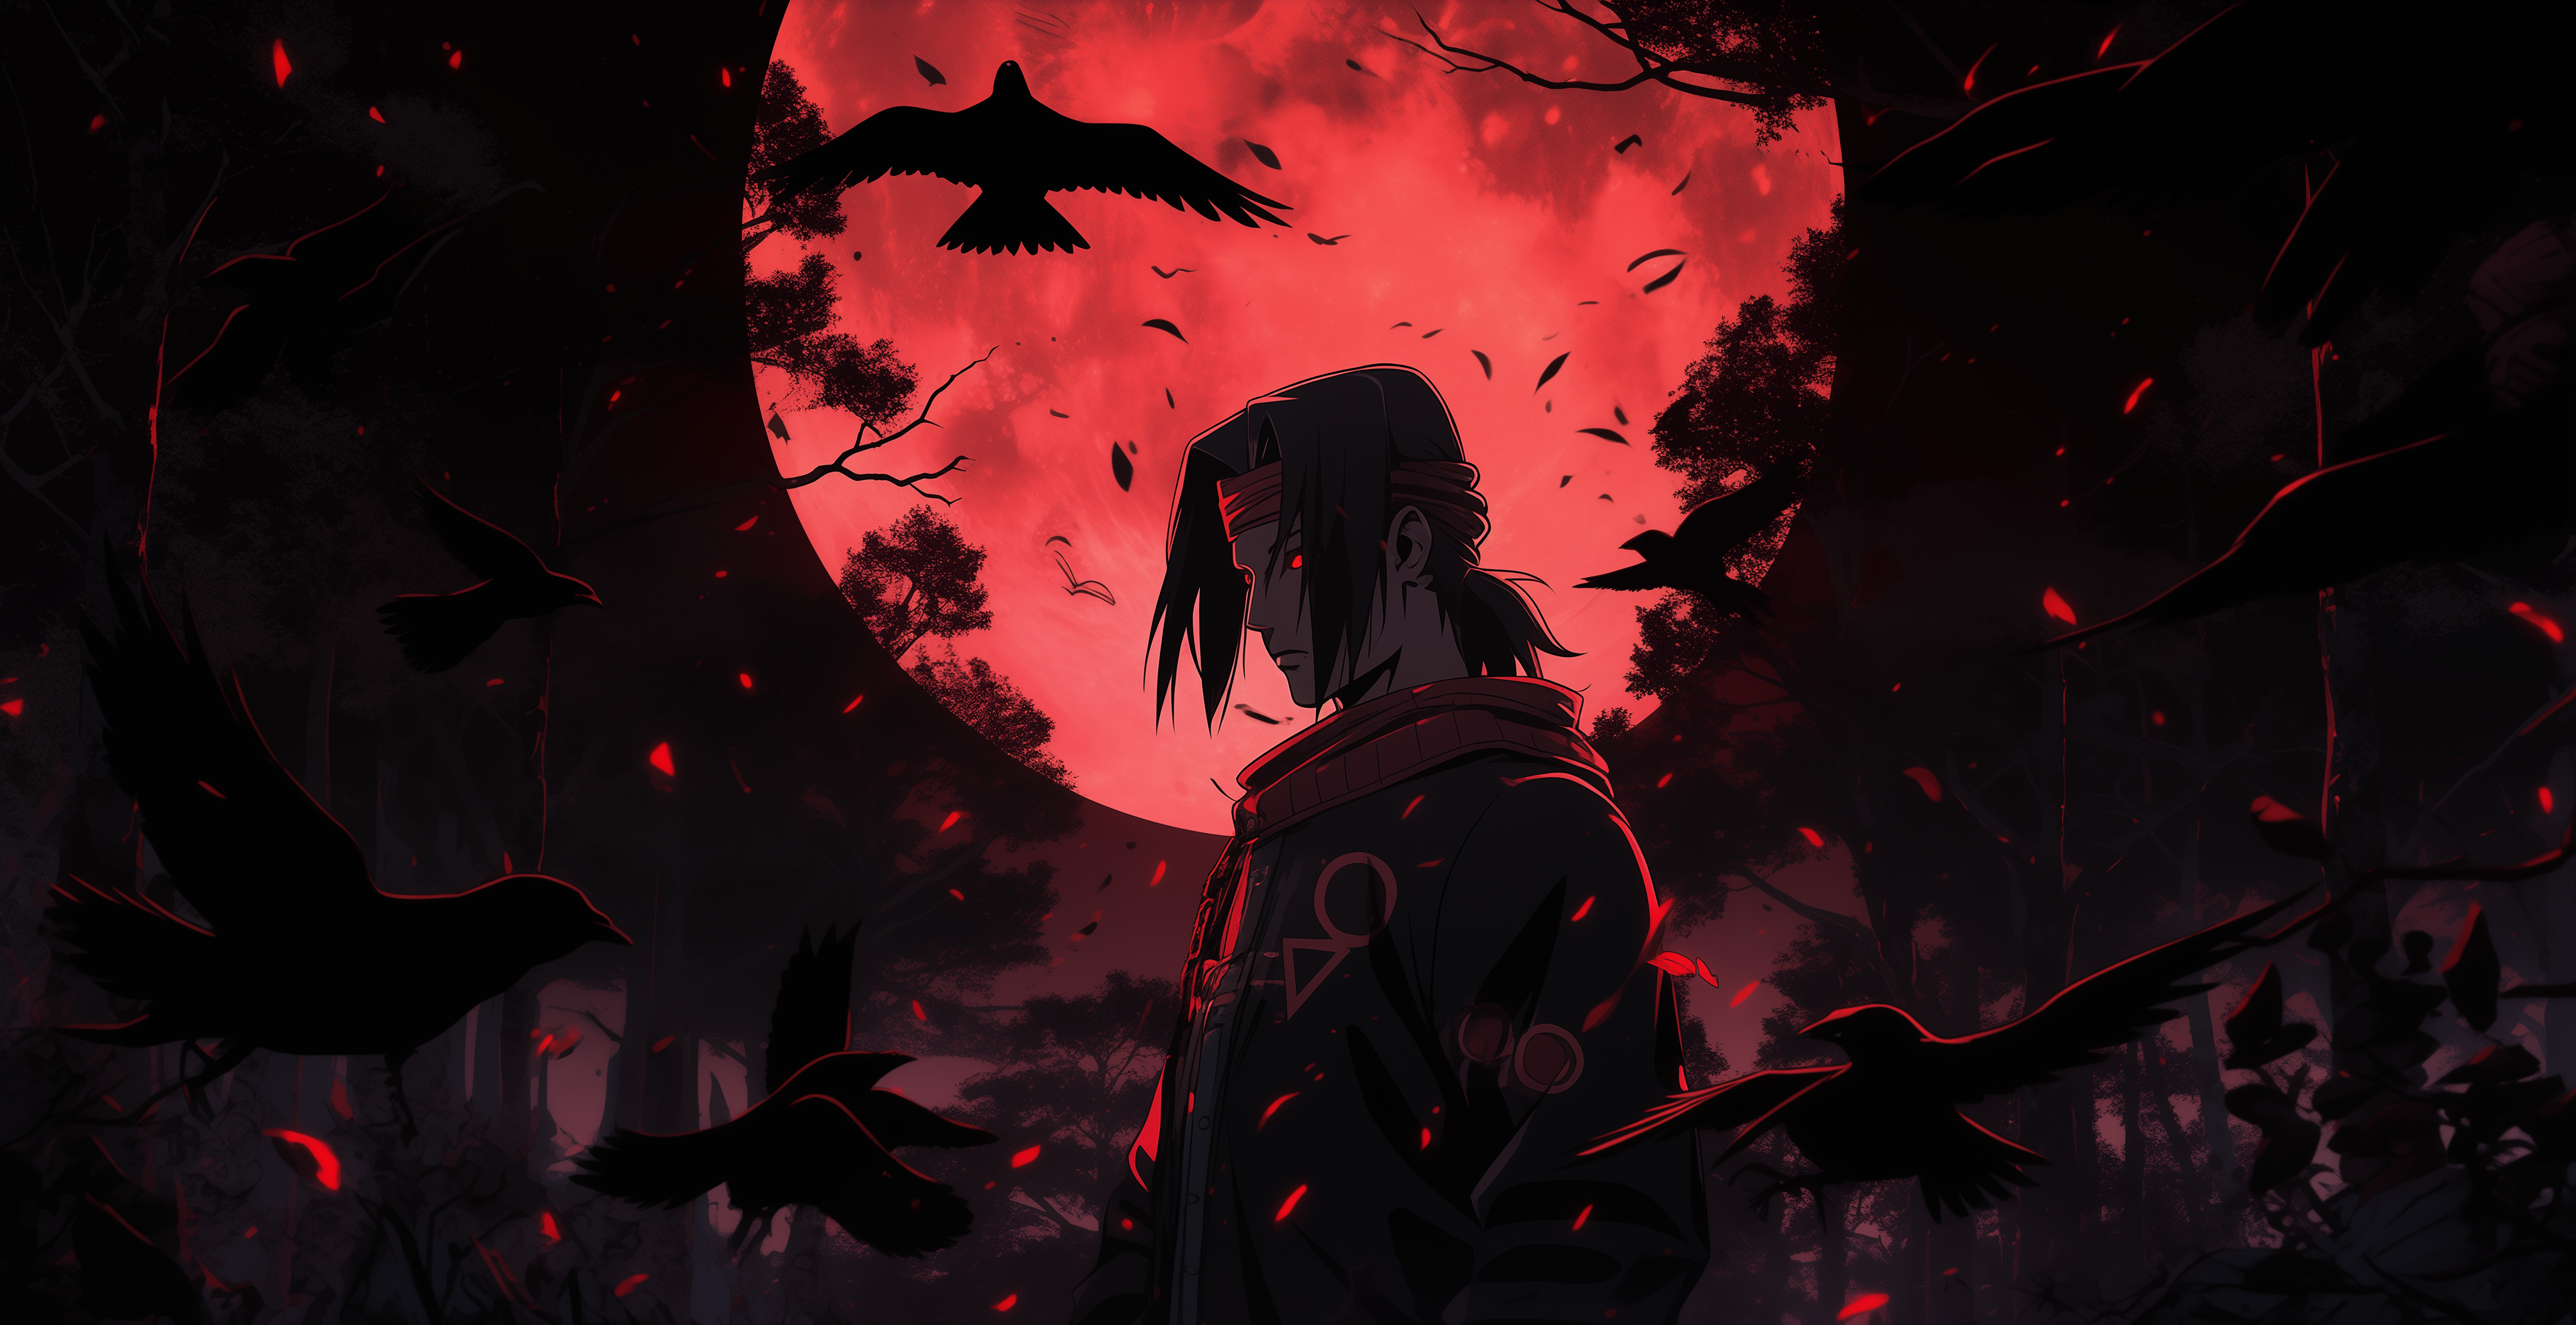 Itachi Uchiha from Naruto: a young ninja with black hair and red eyes, wearing a black cloak with red clouds.